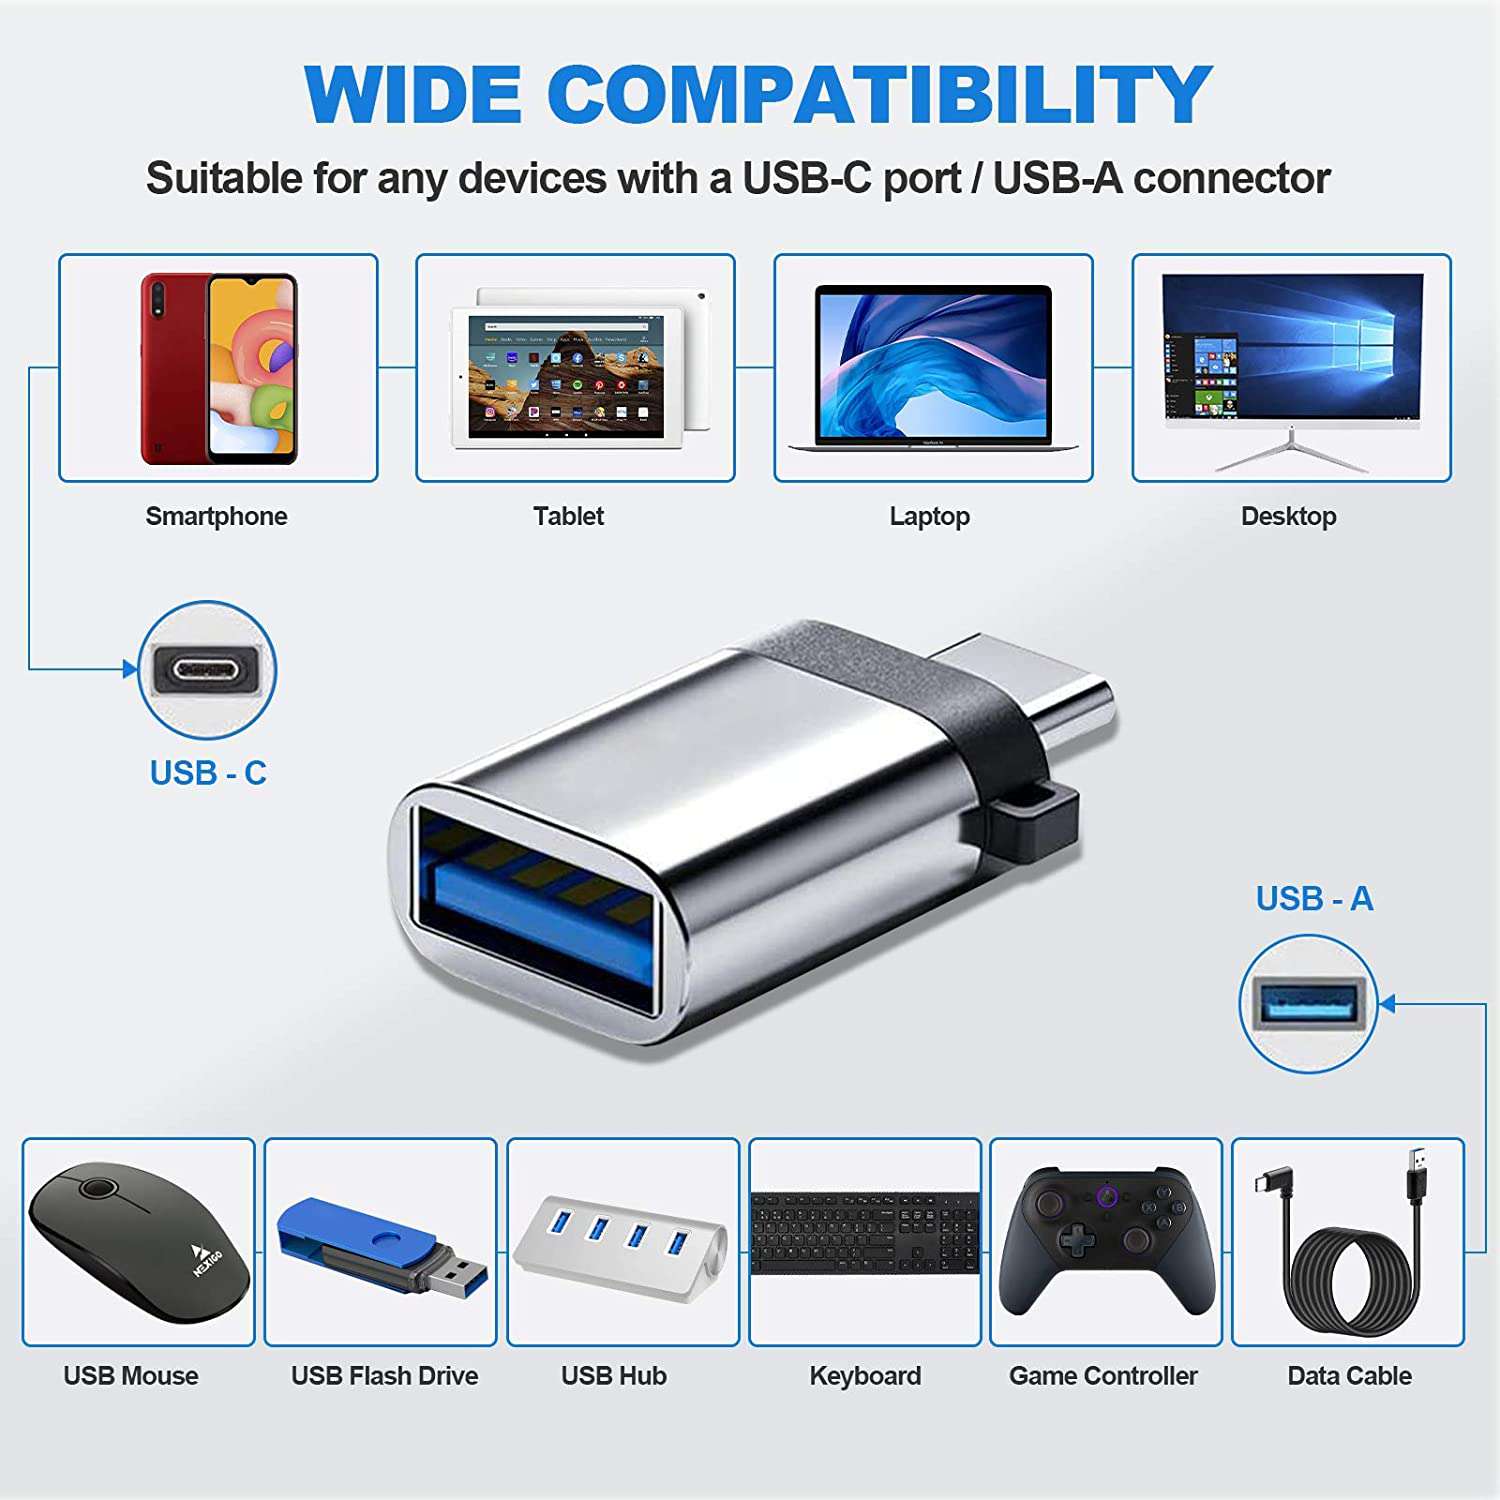 Wide compatibility: USB-C port for smartphones, laptops, and more; USB-A port for mice, keyboards, and storage.